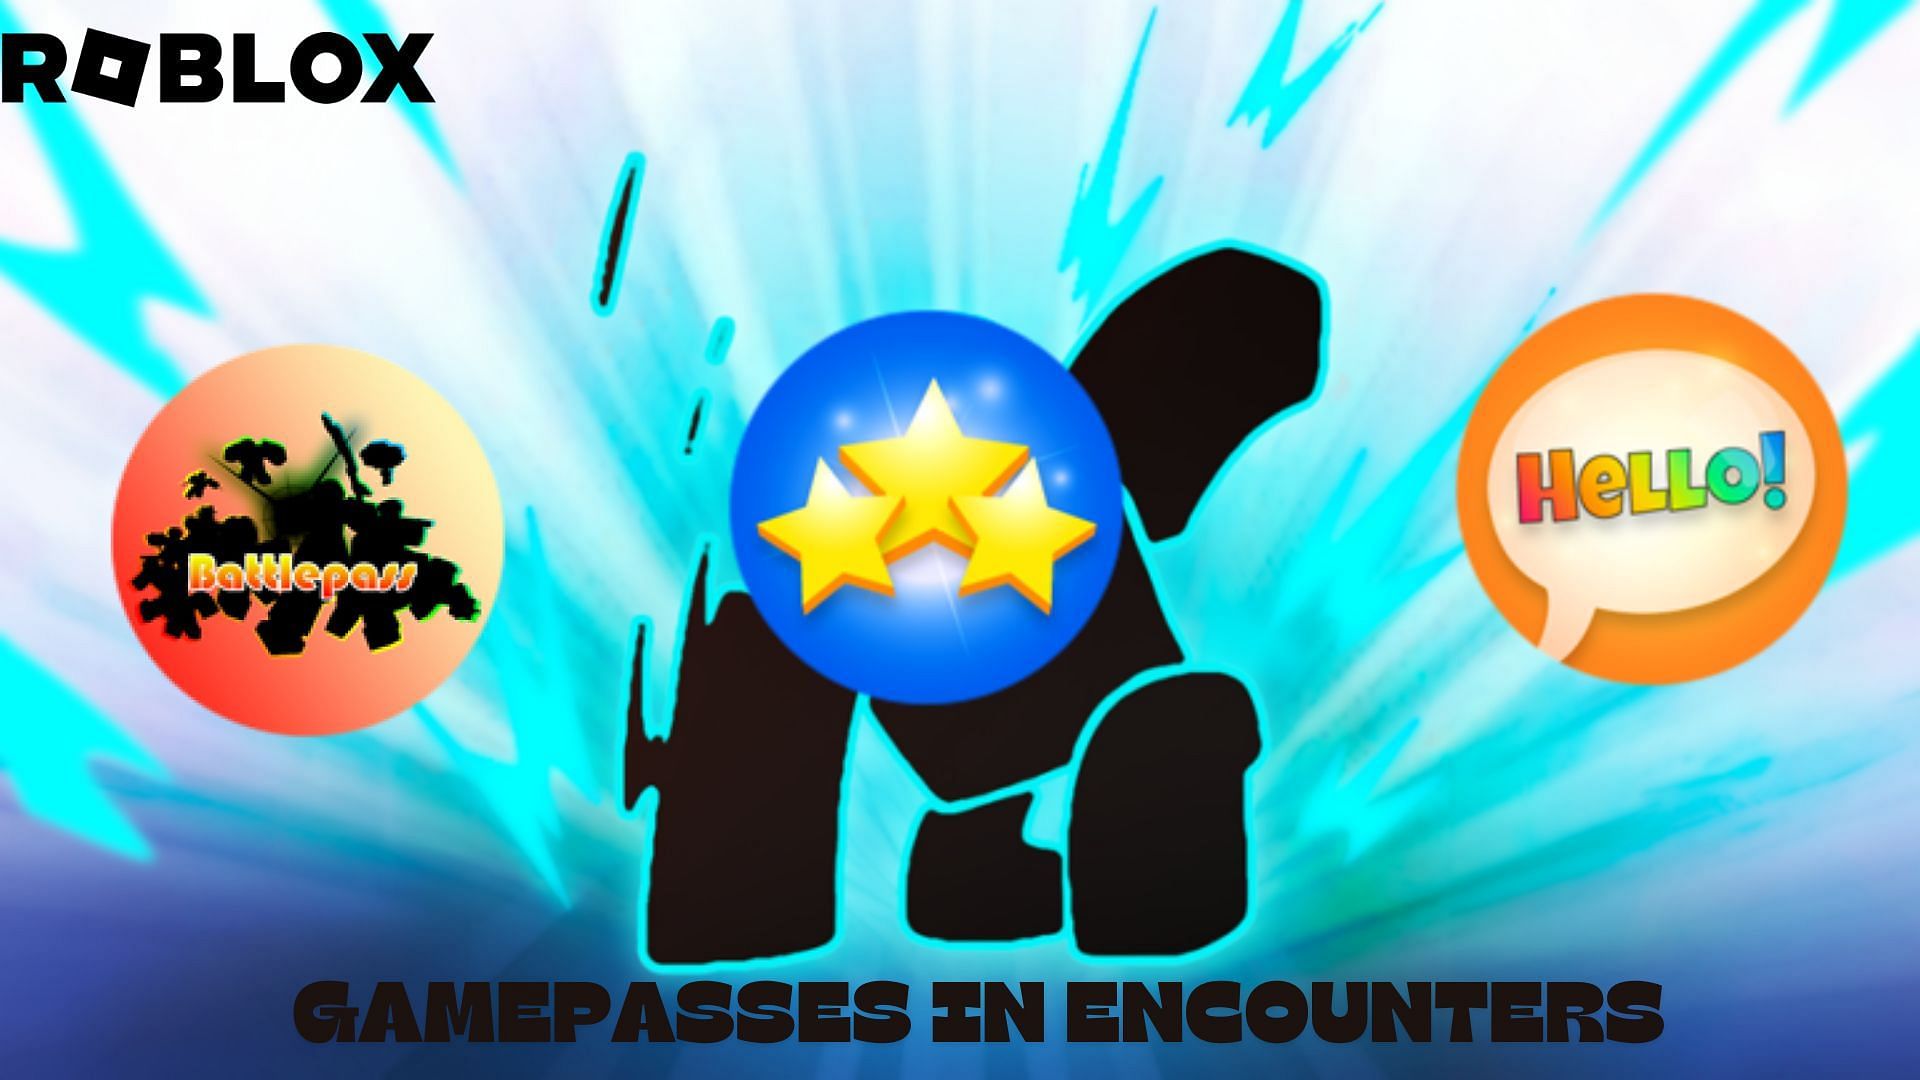 Featured cover of Gamepasses in Encounters (Image via Roblox and Sportskeeda)